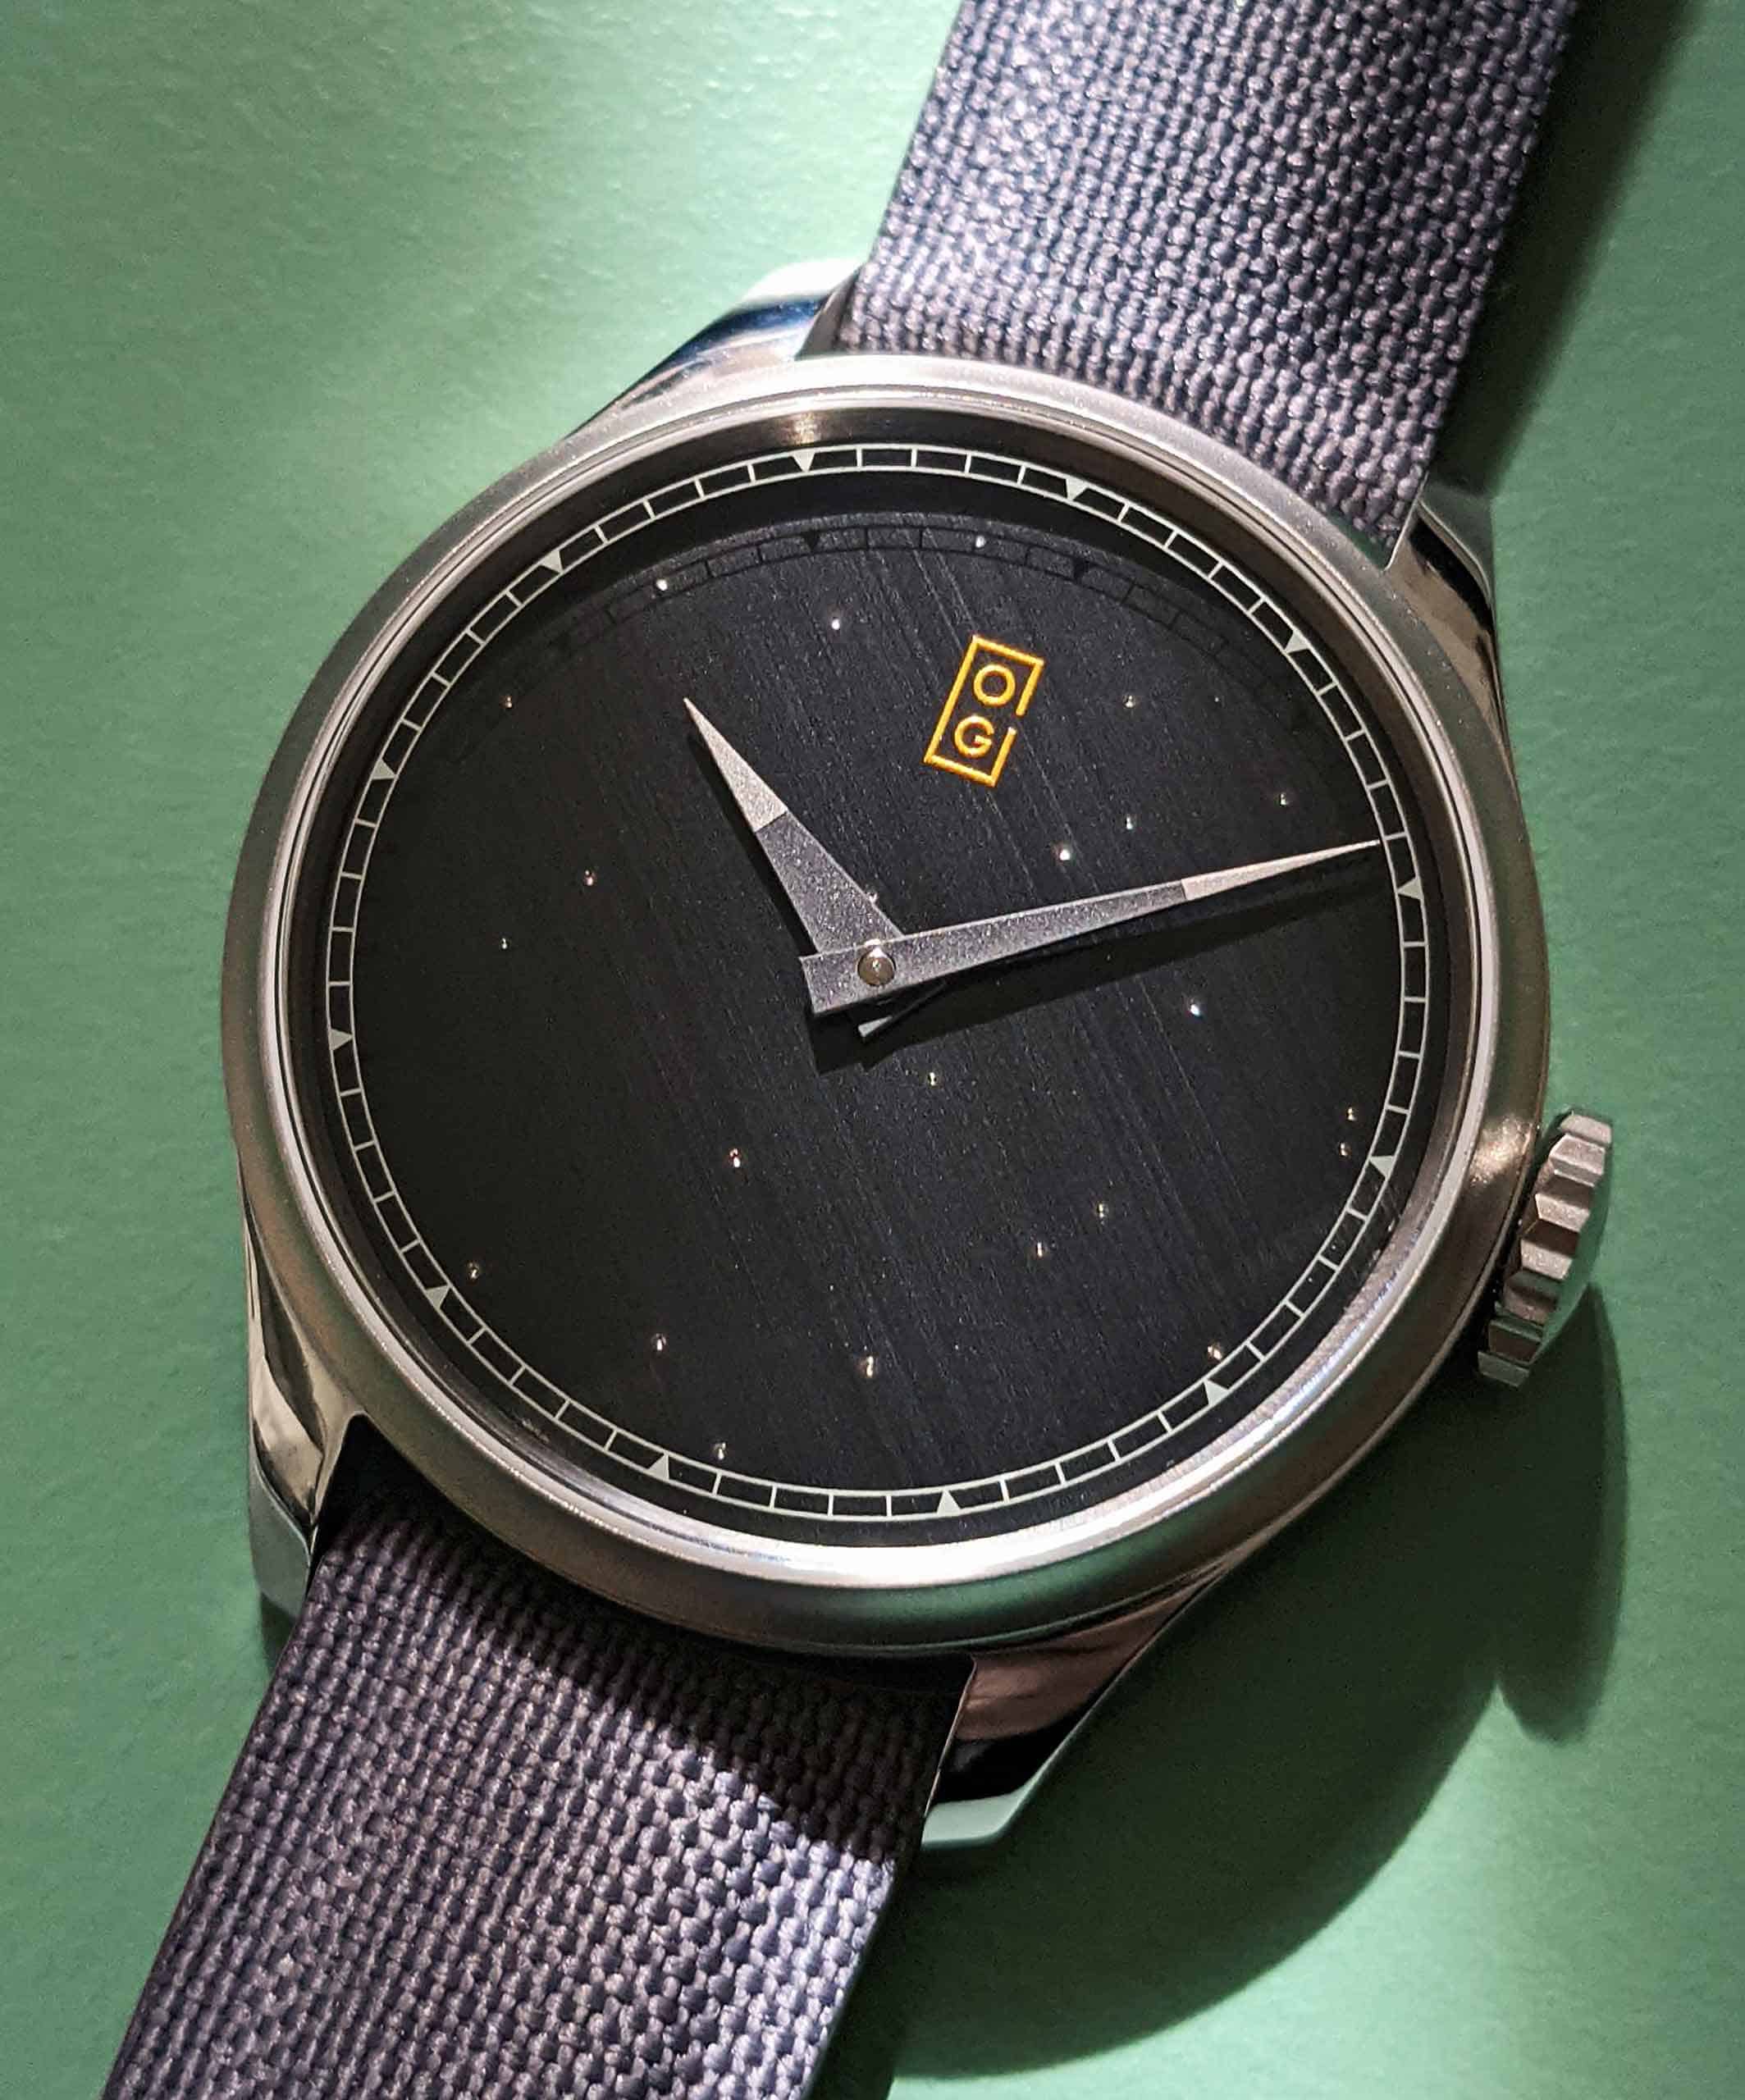 Introducing the O.G Deep Space, the First Watch from a New Brand Promising Small Batch, Themed Watches